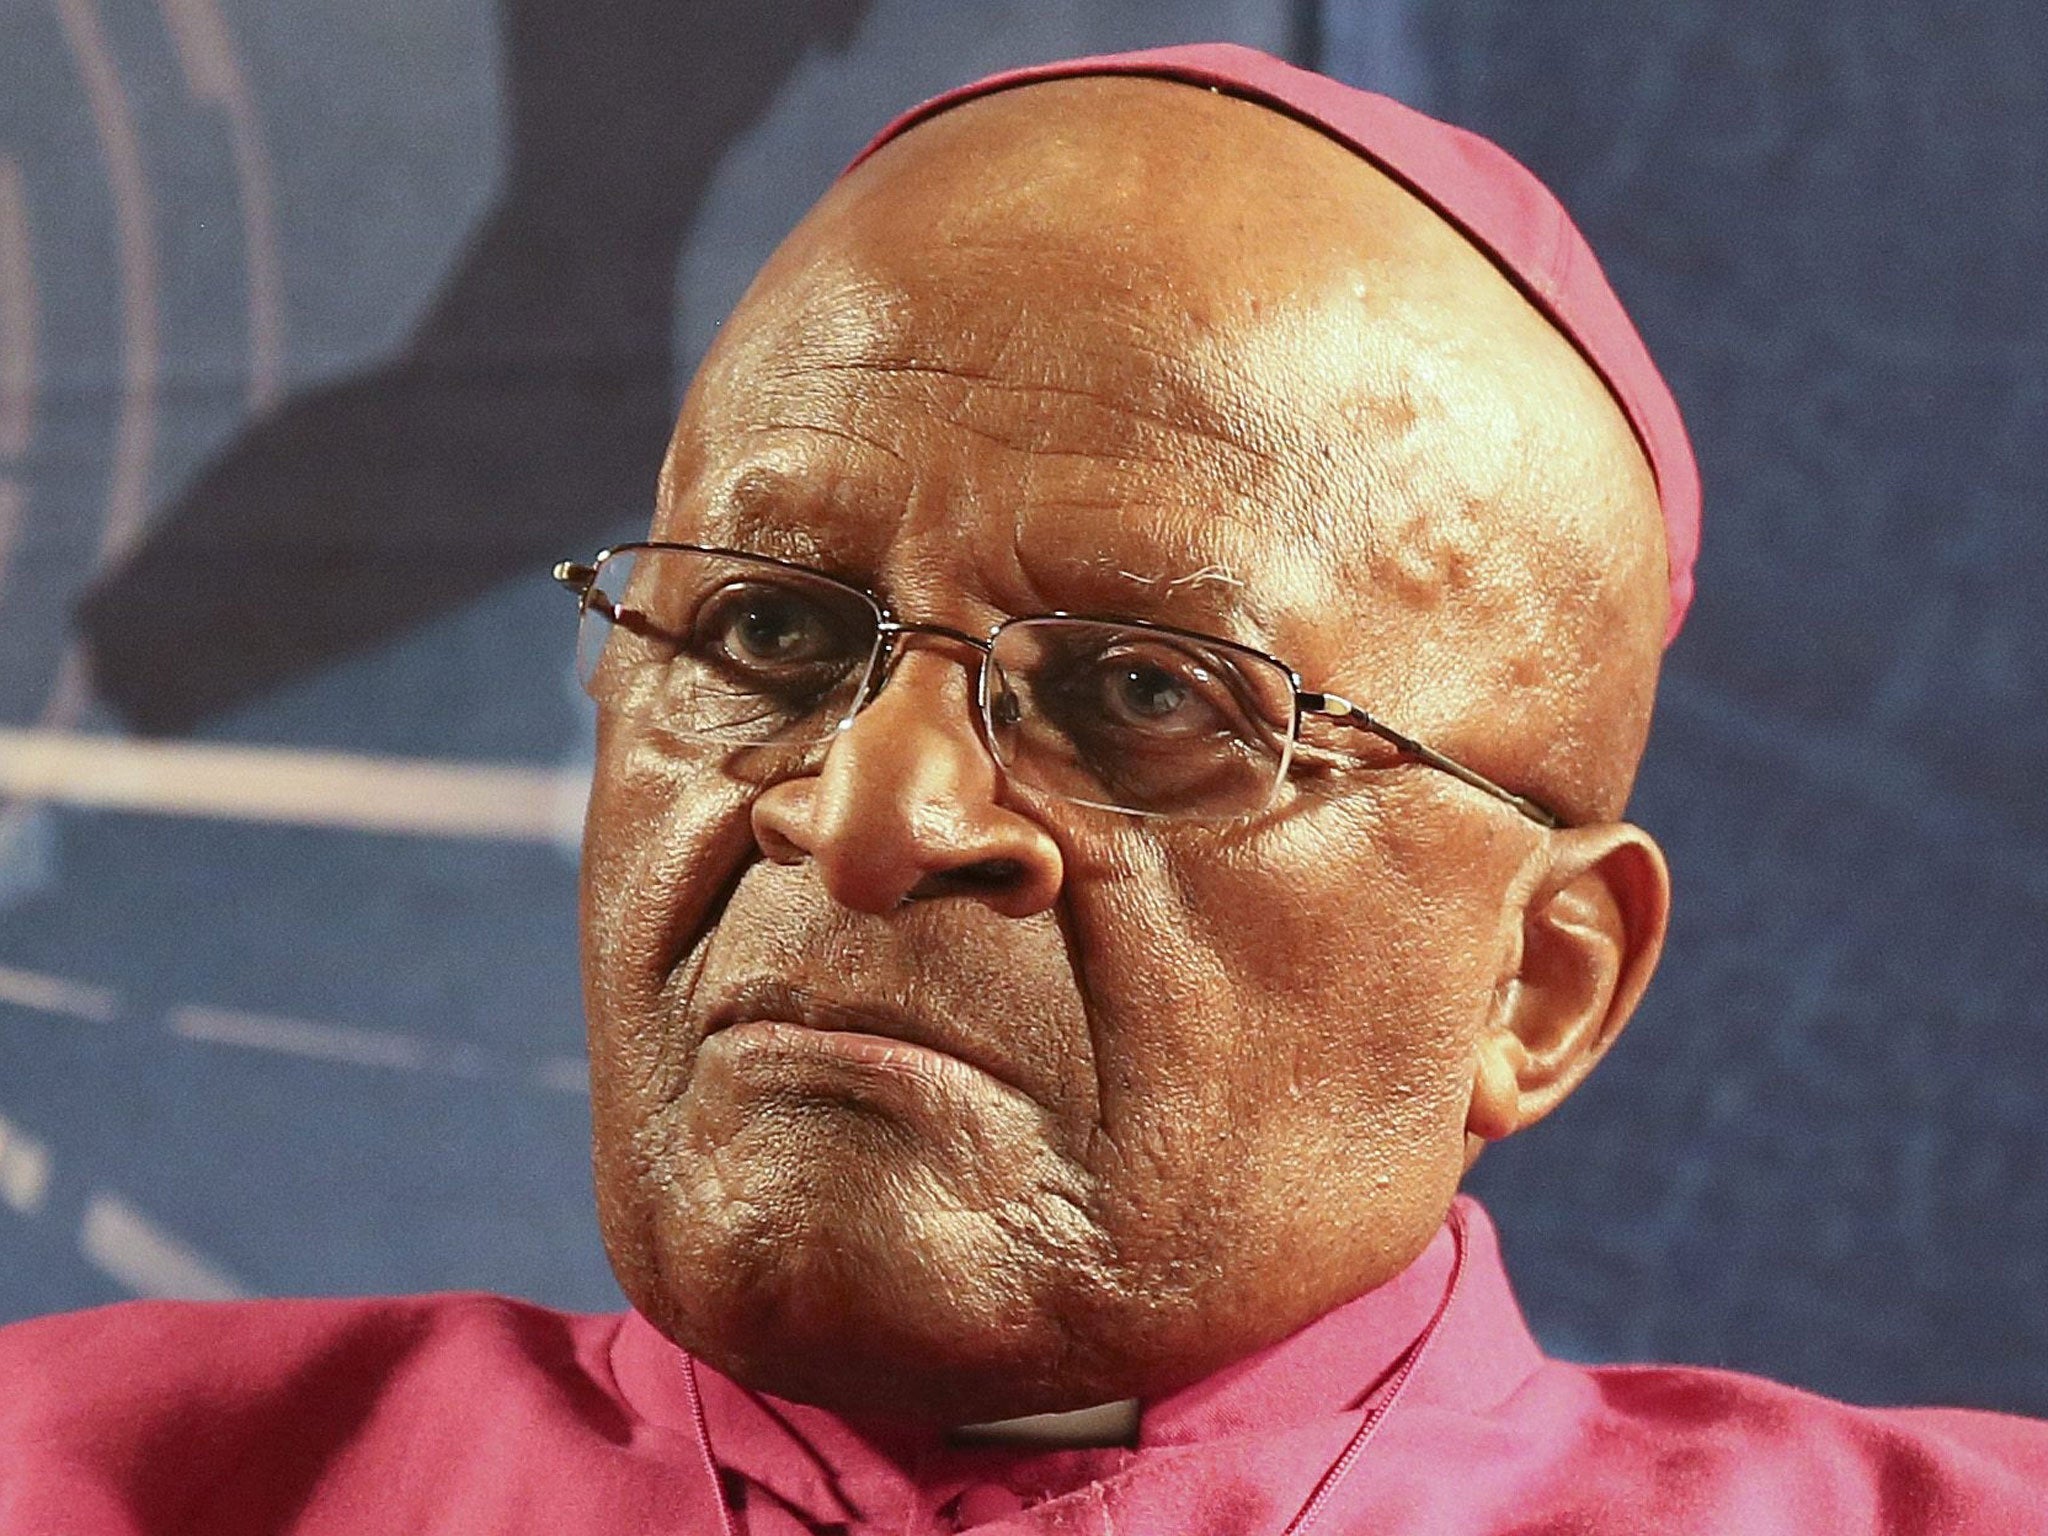 Desmond Tutu calls for "dignity for the dying"